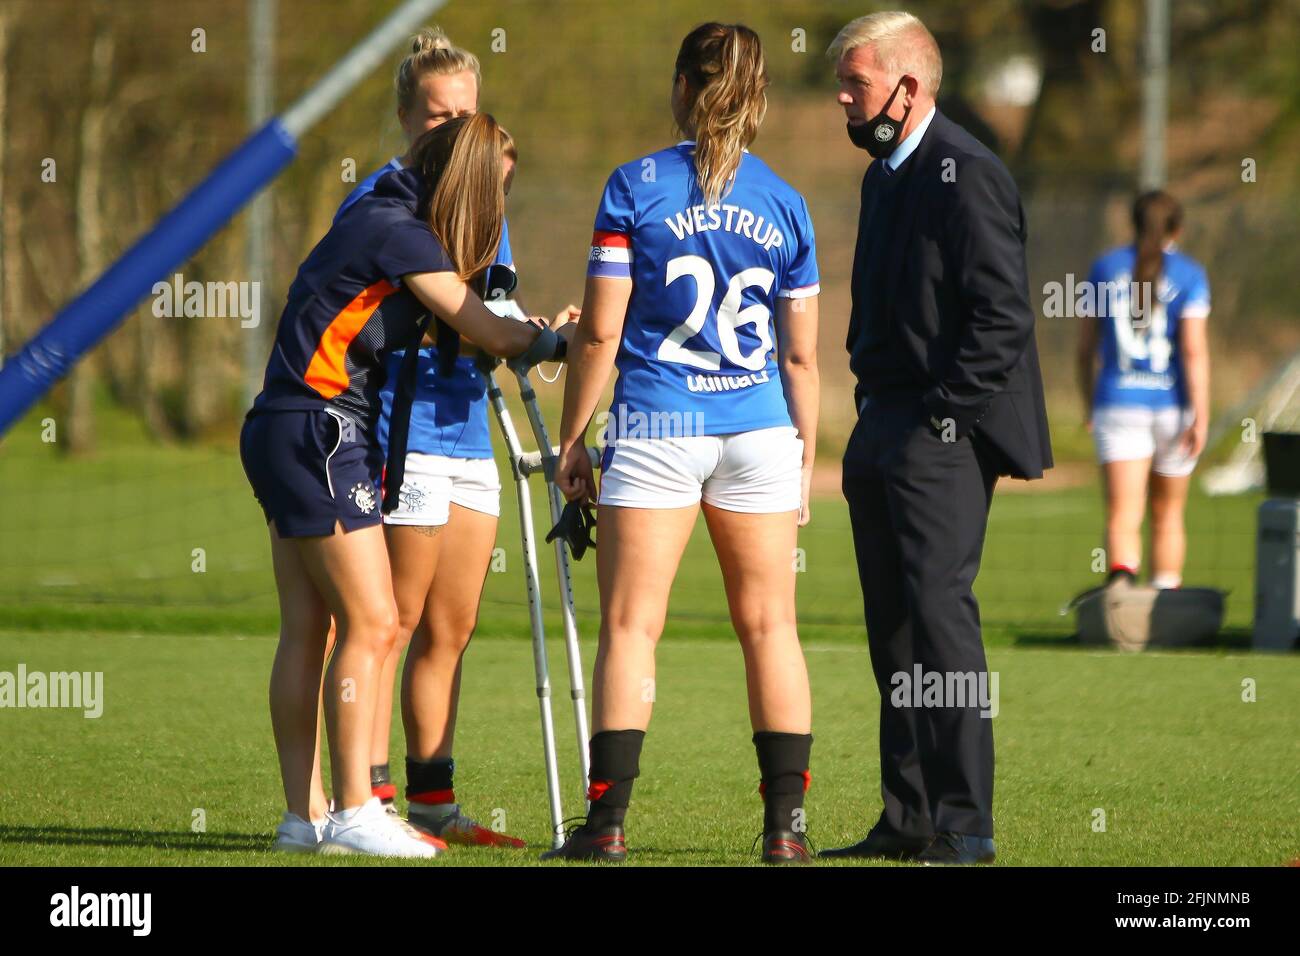 Milngavie, East Dunbartonshire, Scotland. 25th April, 2021. Kirsty Howart (#21) of Rangers Women FC visits here team mates on crutches following her ACL Injury after the Scottish Building Society Scottish Women's Premier League 1 Fixture Rangers FC vs Forfar Farmington FC, Rangers Training Complex, Milngavie, East Dunbartonshire. 25/04/2021 | Credit Colin Poultney/Alamy Live News Stock Photo